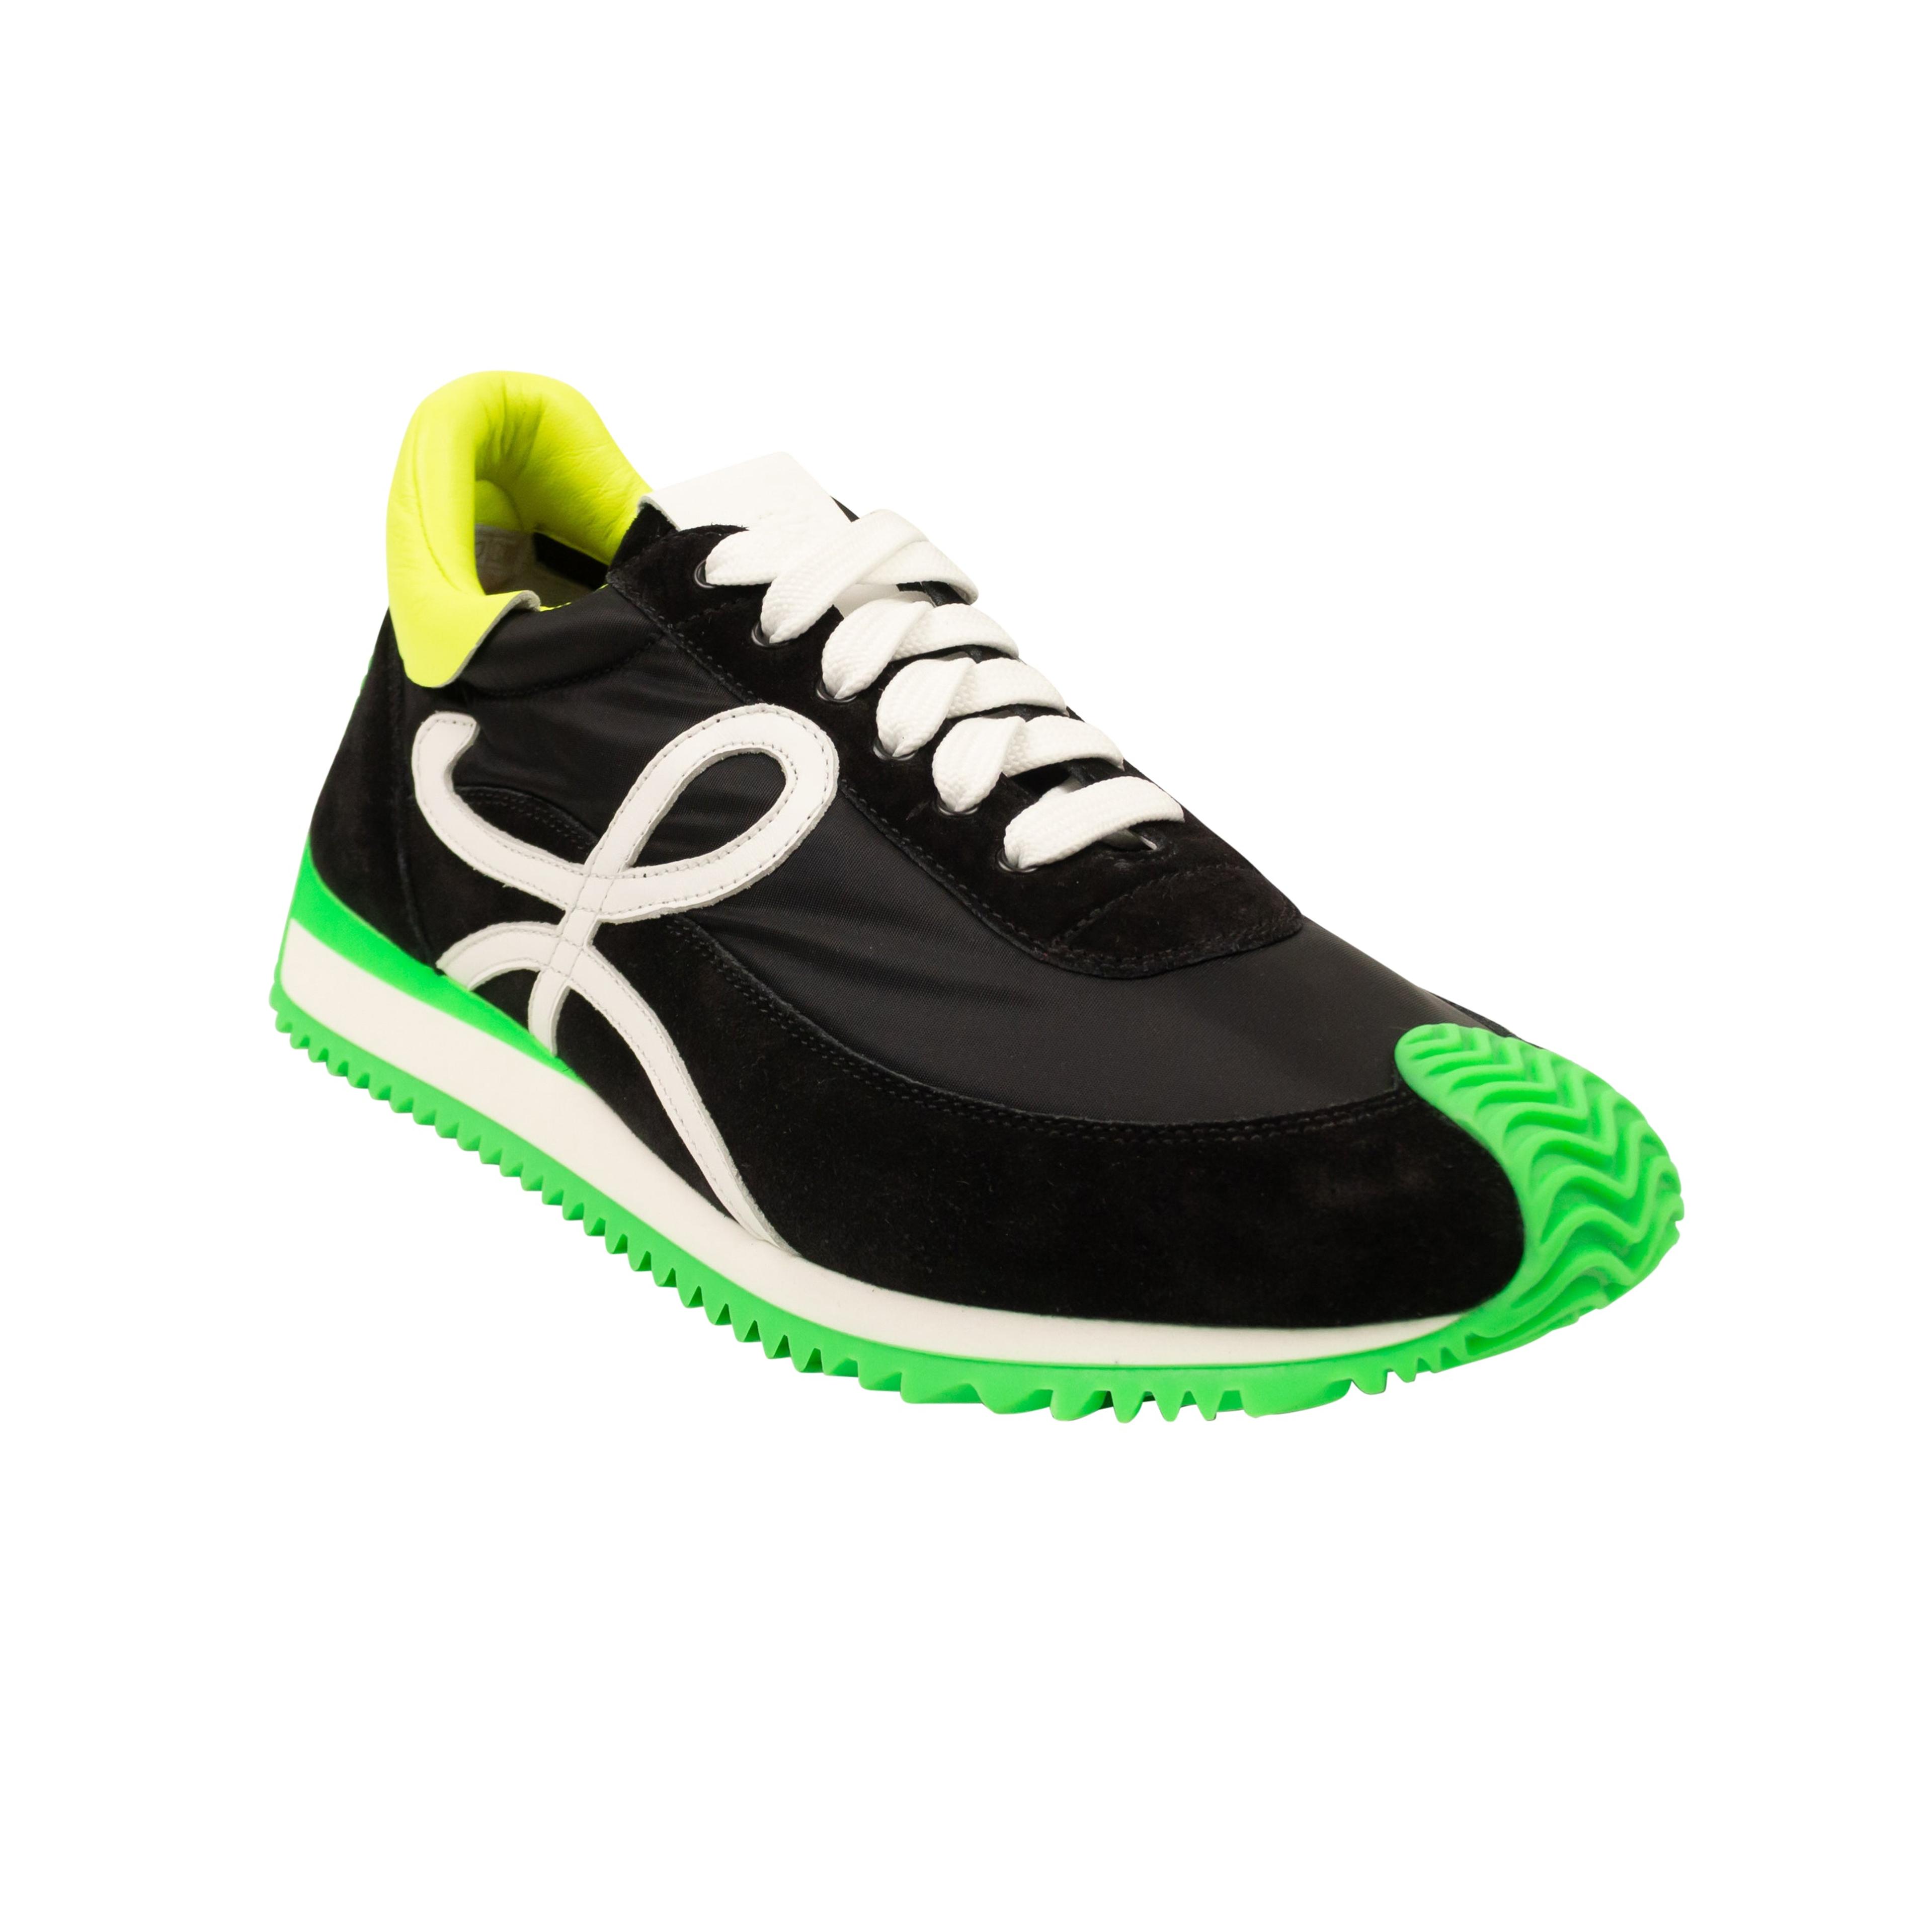 Alternate View 1 of Black And Multi Flow Runner Lace Up Sneakers